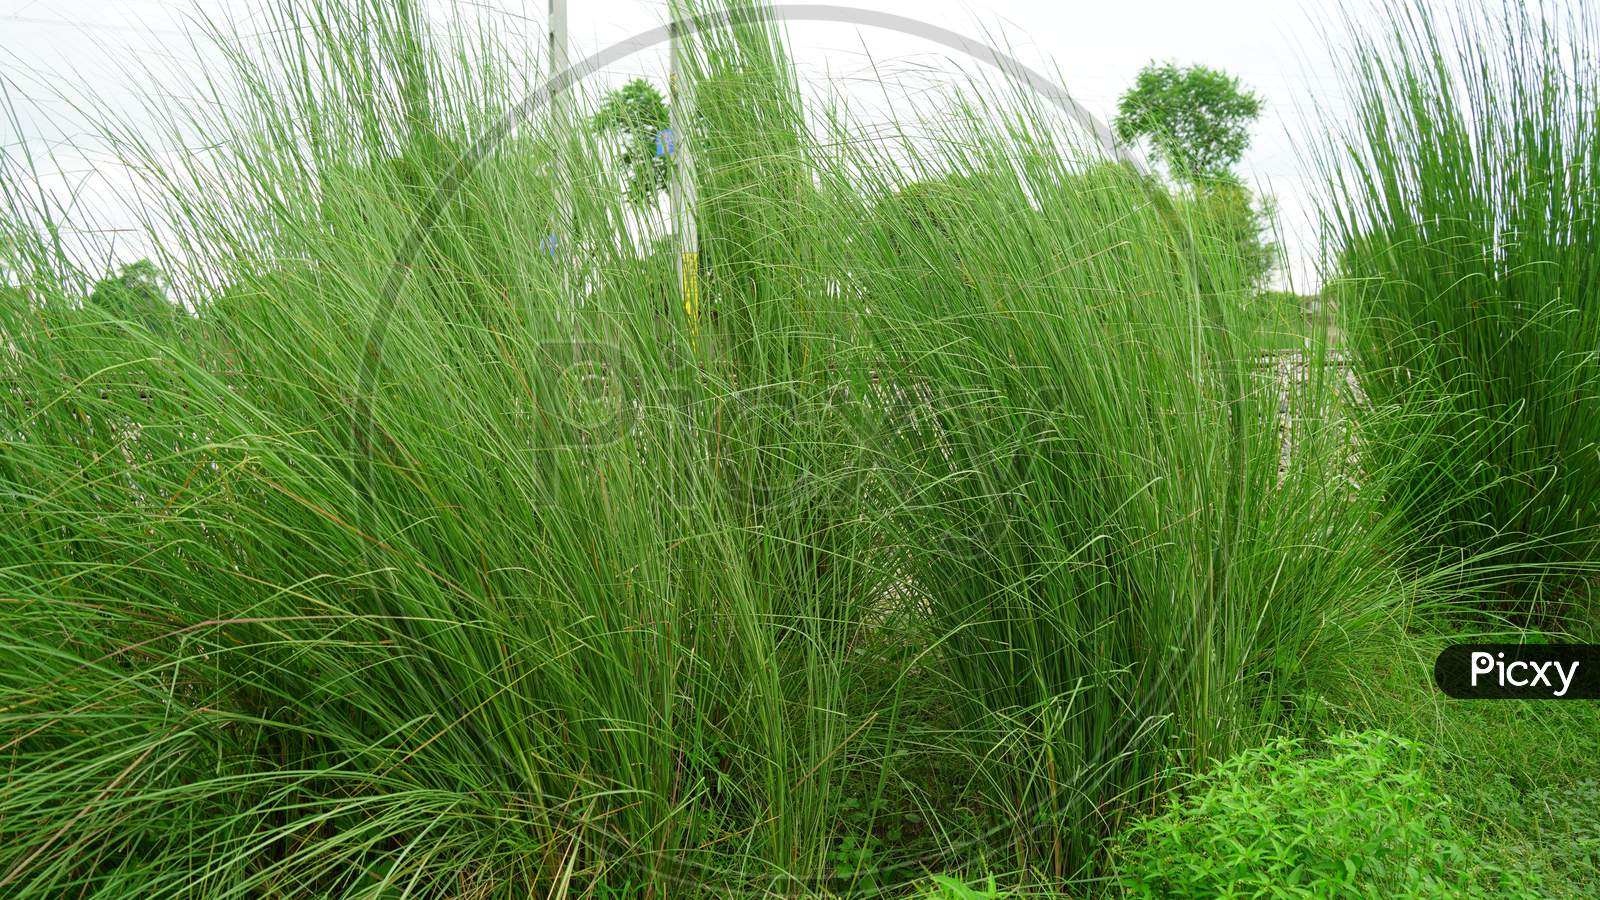 Ornamental plant of Pennisetum Alopecuroides , also known as Fountain grass view, in a field. Beautiful scattering green leaves.